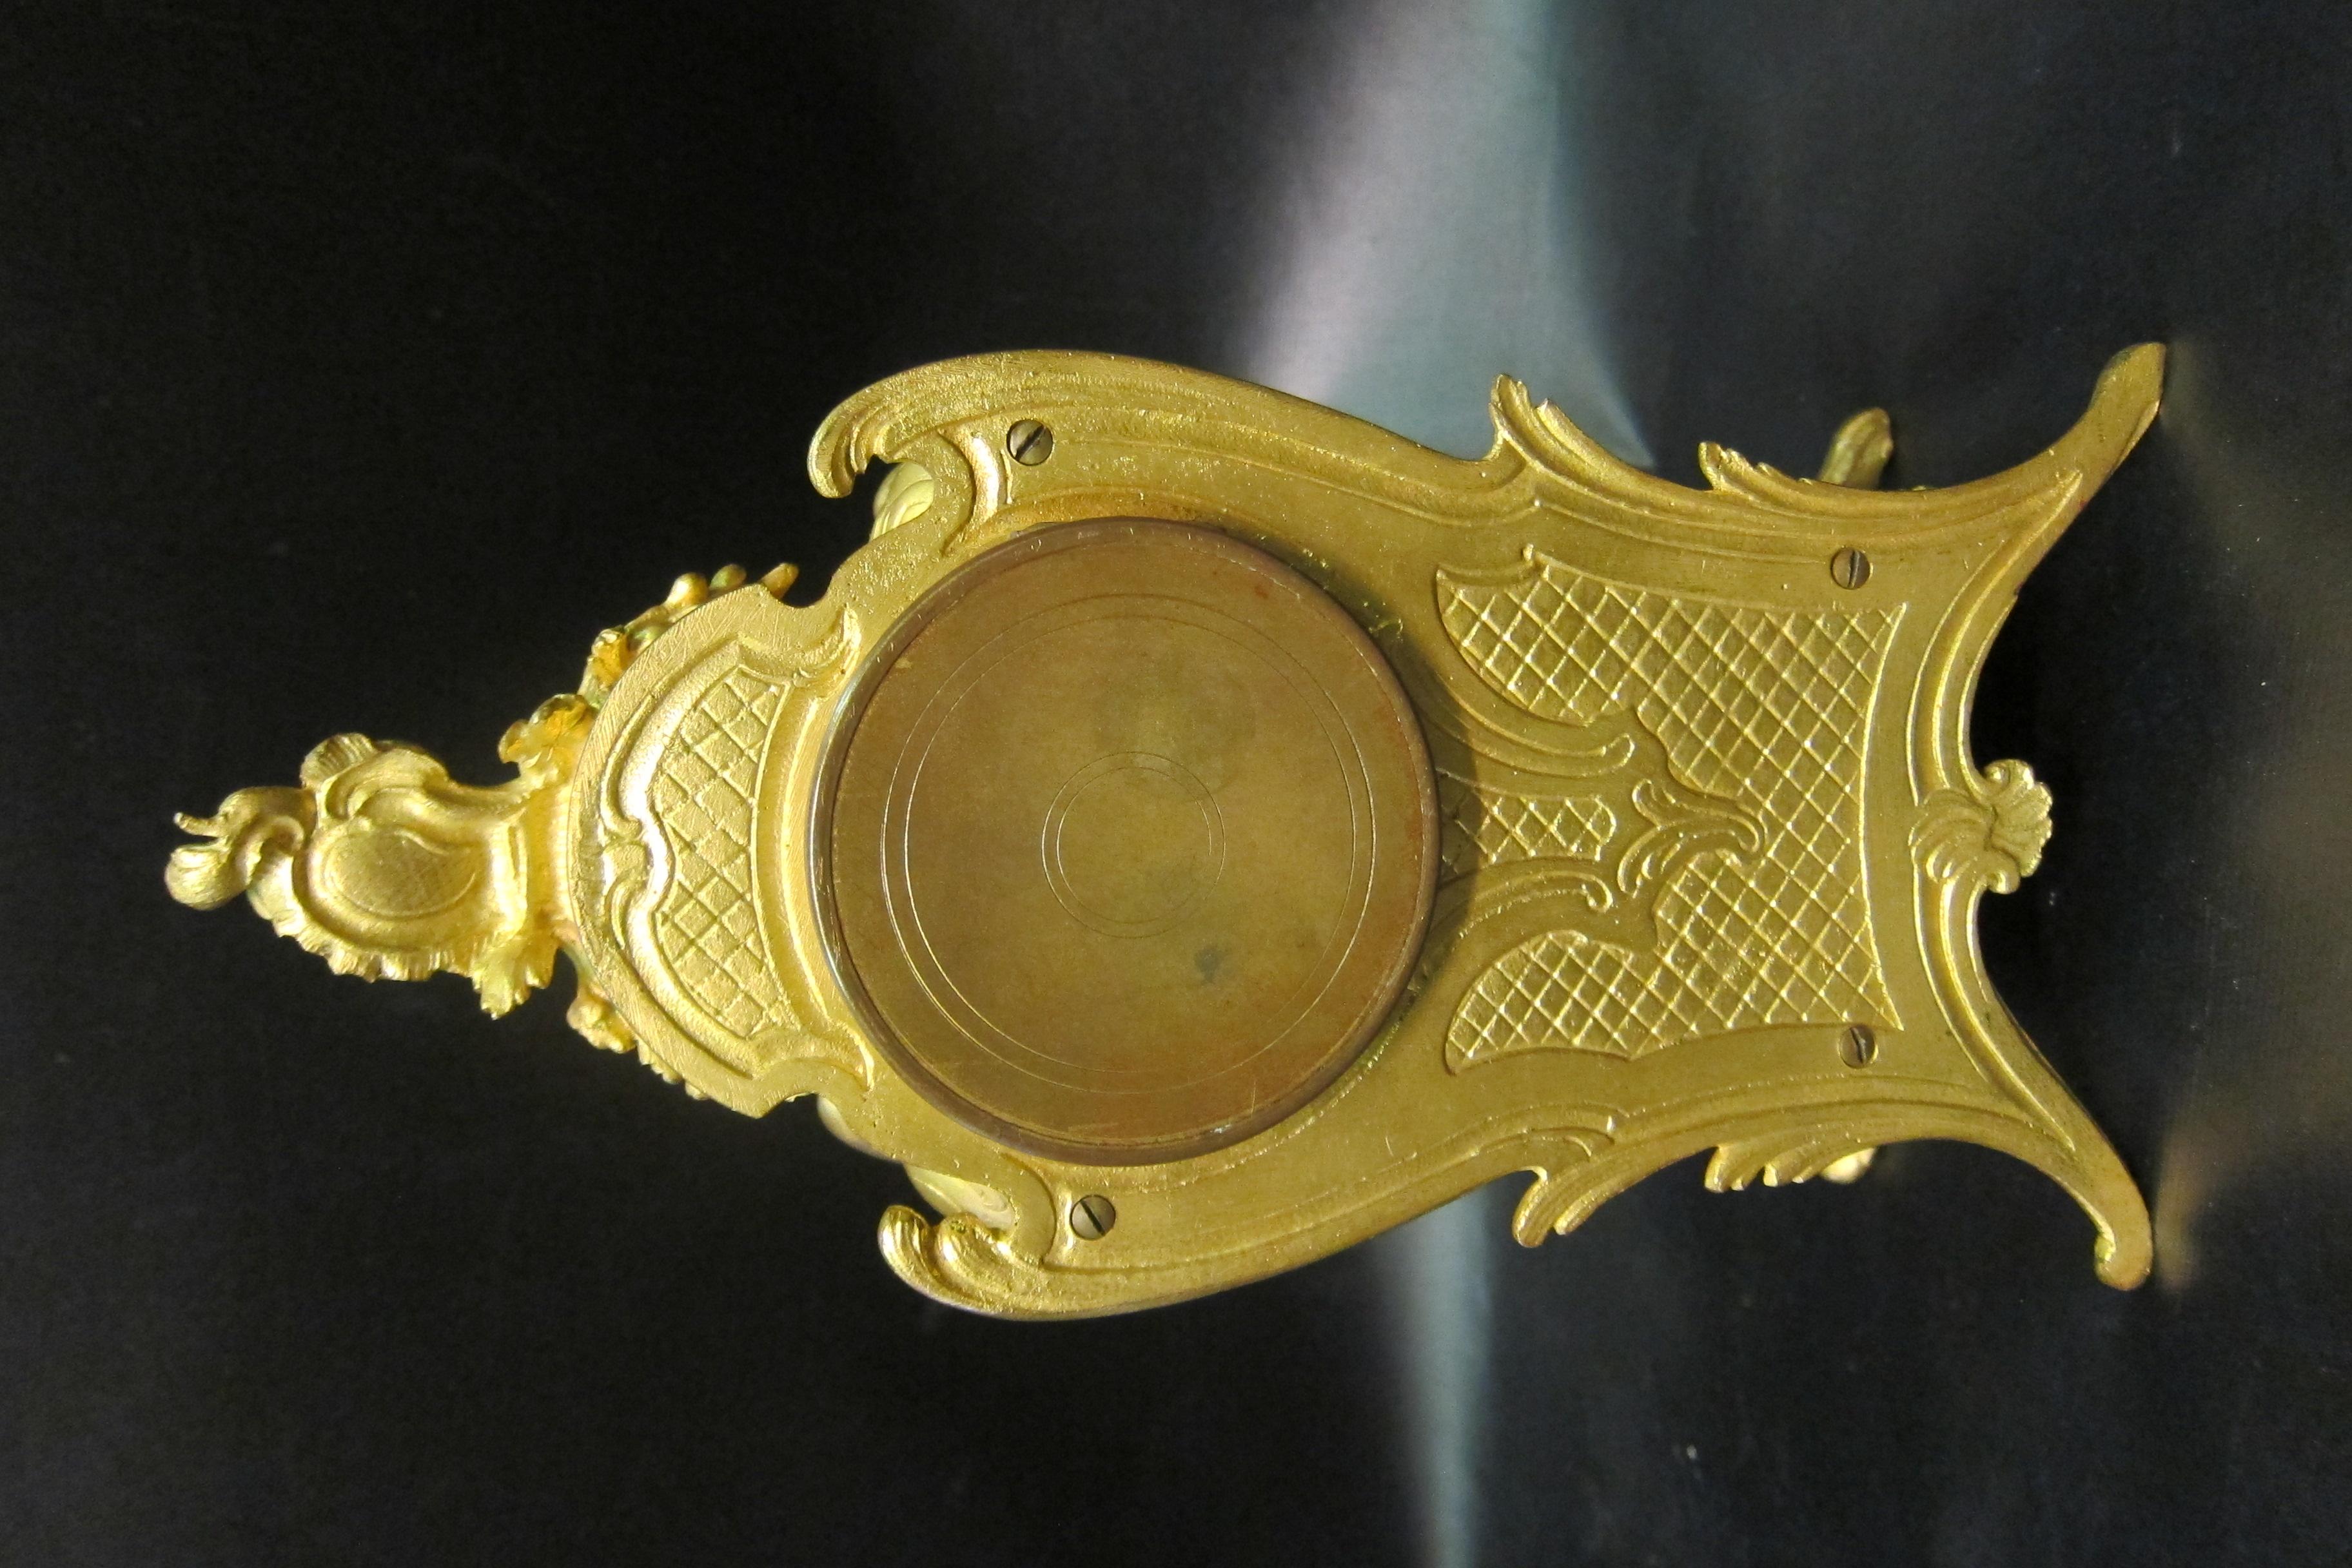 Vintage Mid-19th Century French Gilt Bronze and Enamel Boudoir Clock For Sale 6